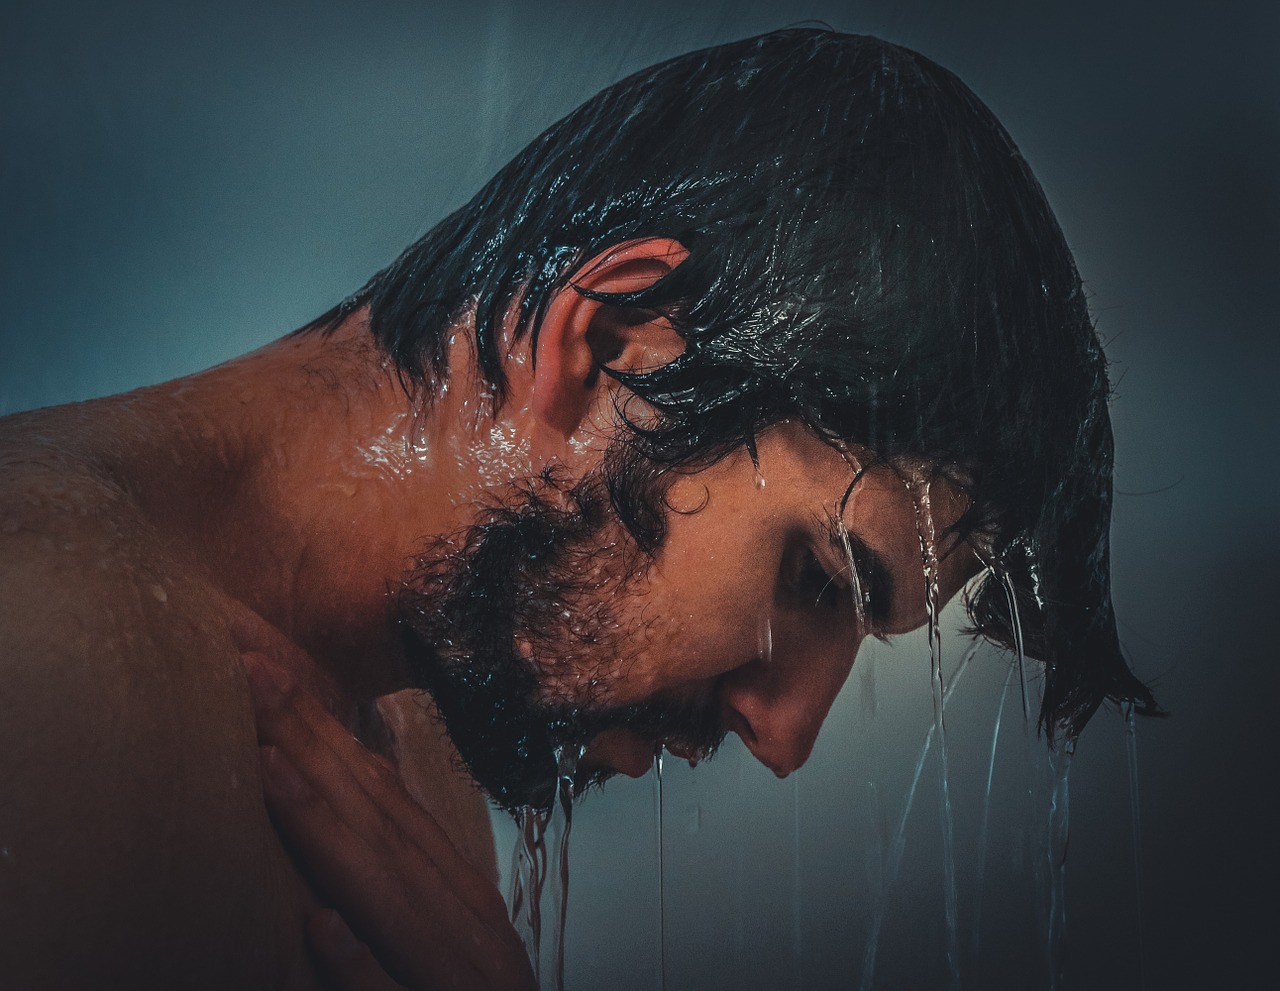 Give your body some love, and wash away the marathon sweat with alternating hot and cold shower bursts